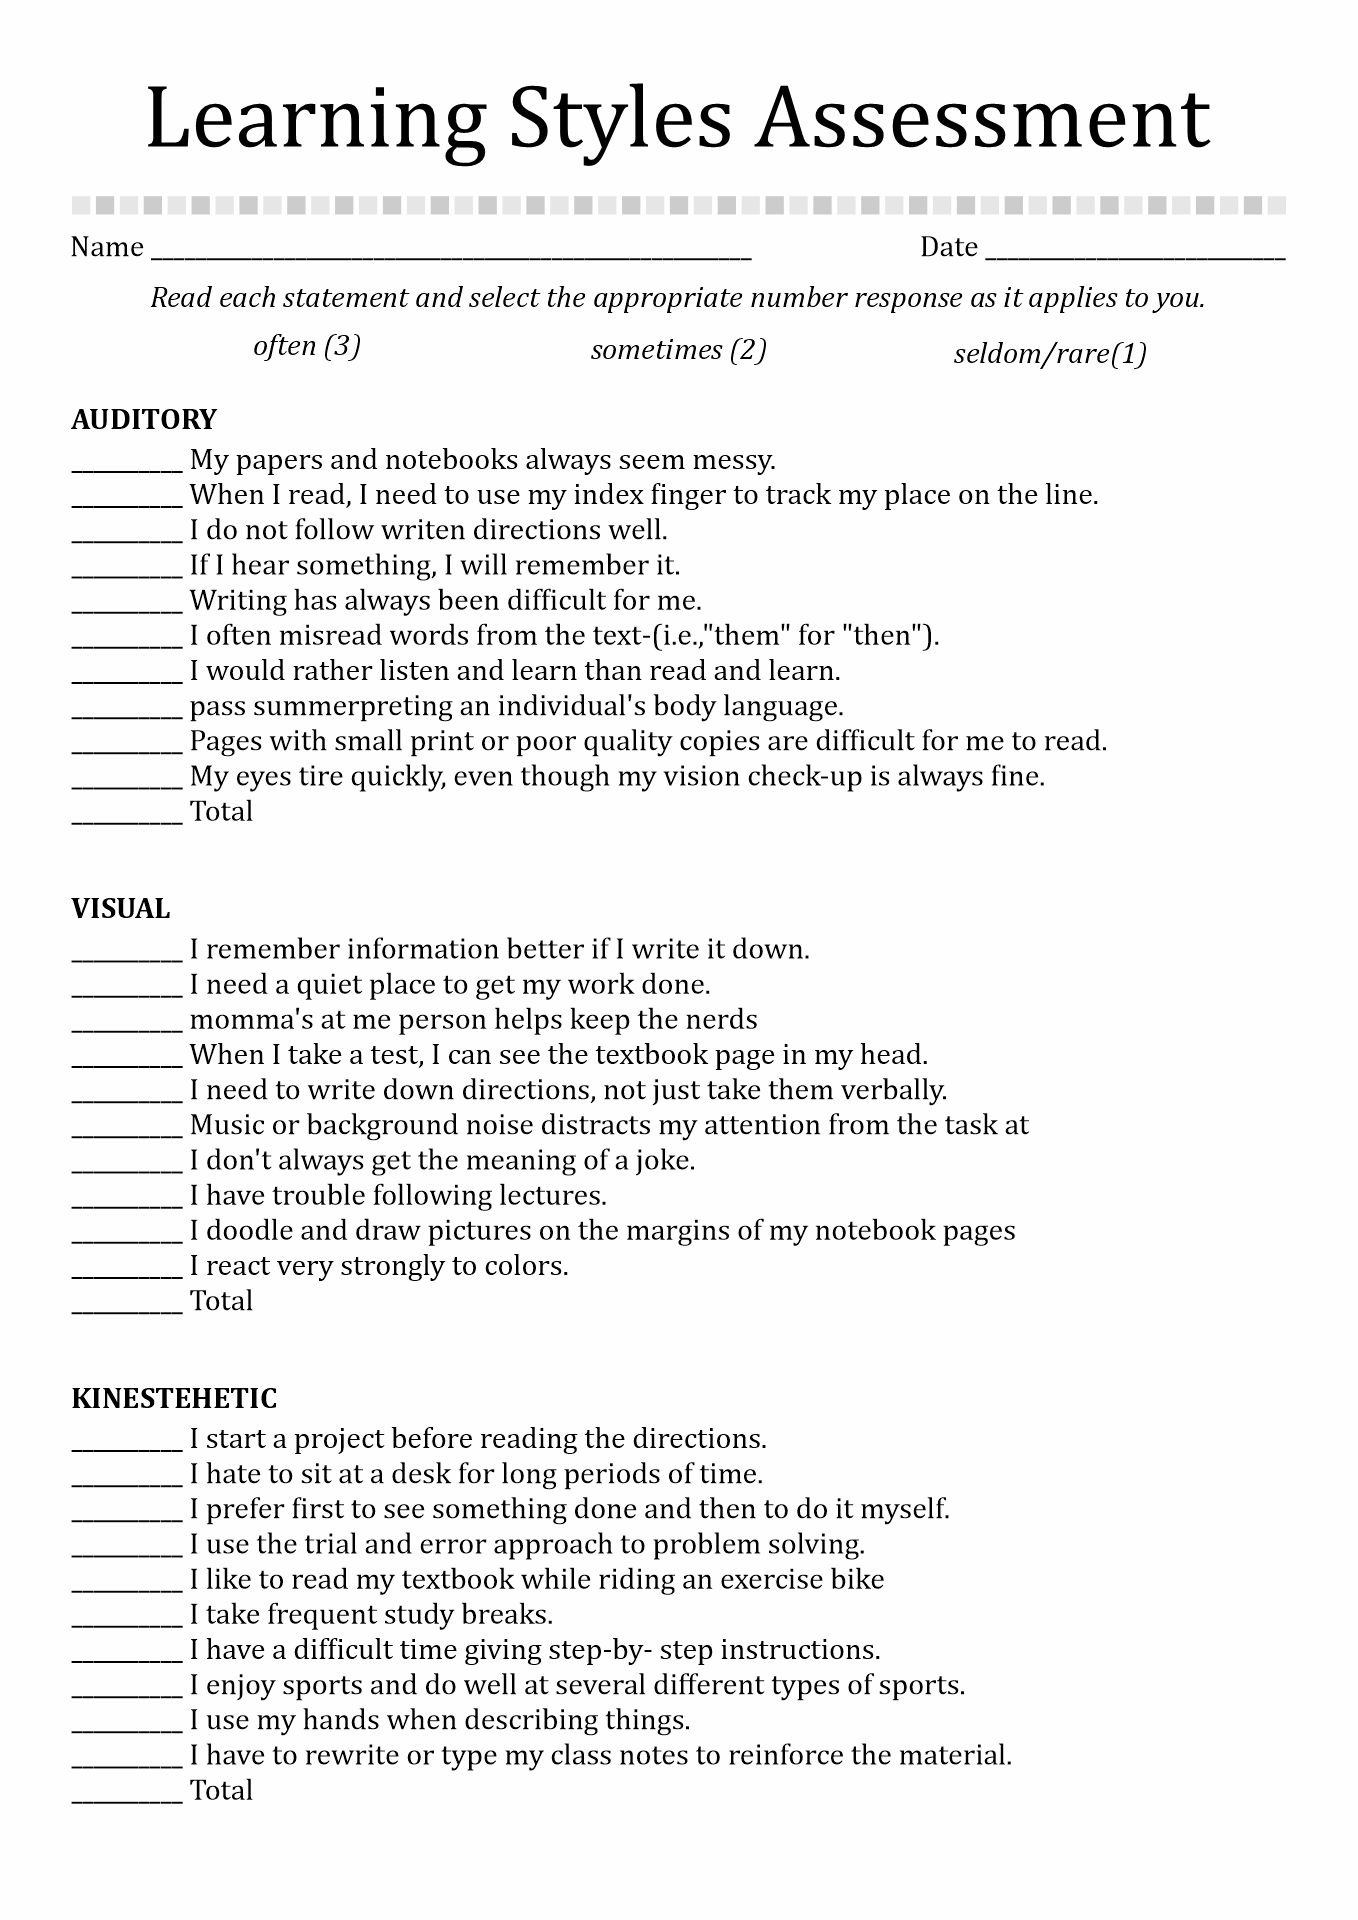 Learning Style Inventory Questionnaire Learning Style Inventory Learning Style Assessment Learning Styles - Free Learning Style Inventory For Students Printable